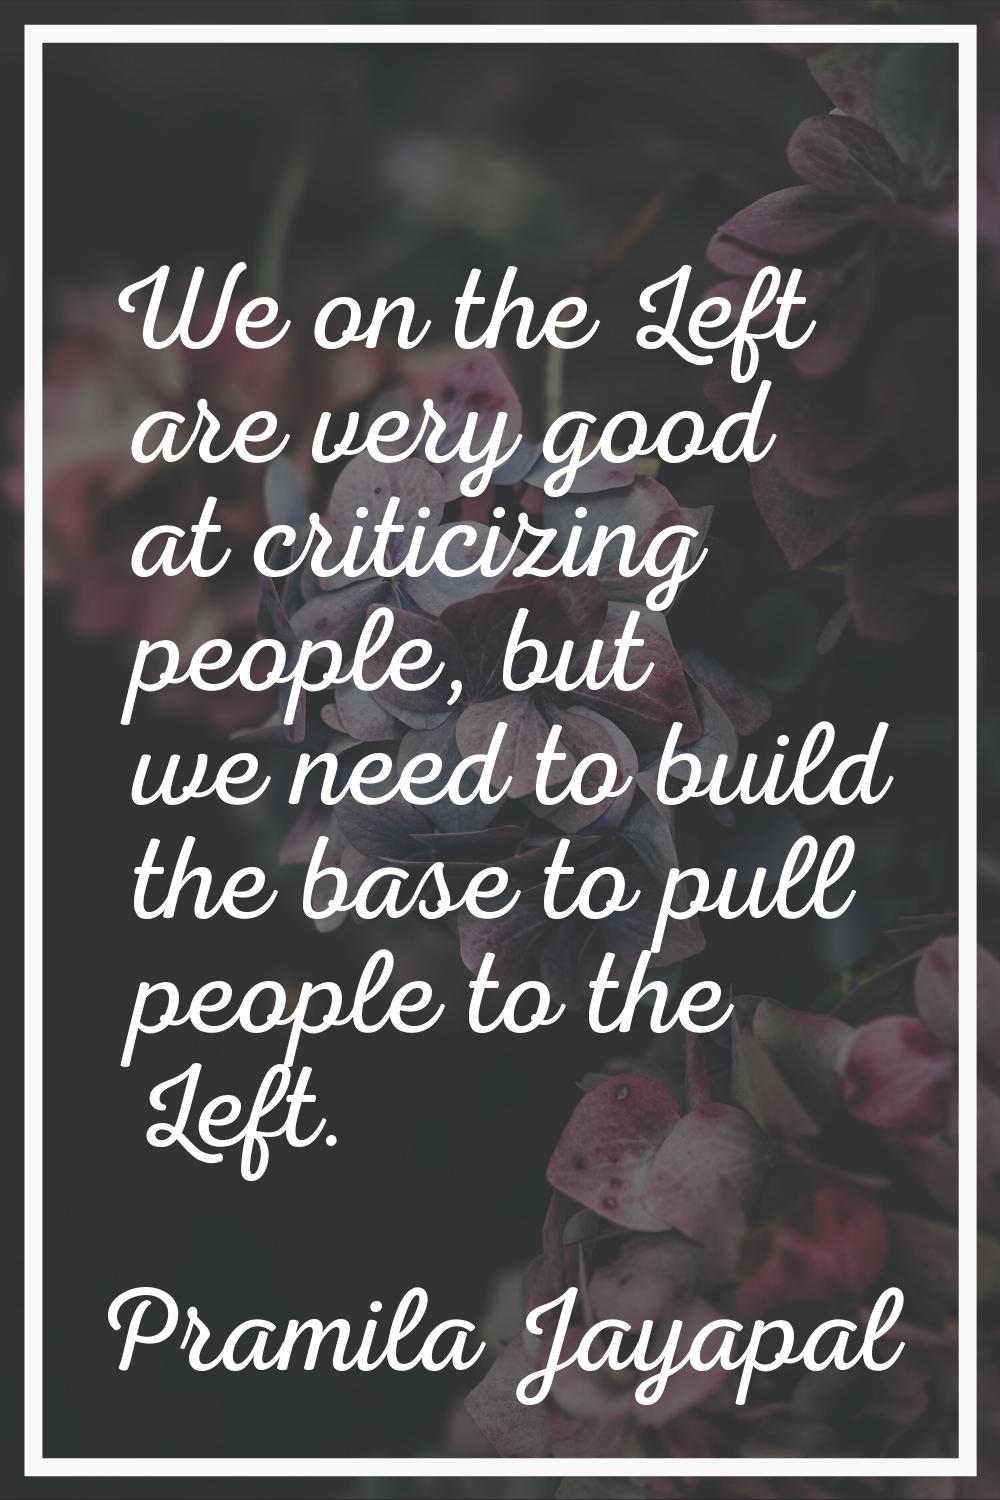 We on the Left are very good at criticizing people, but we need to build the base to pull people to